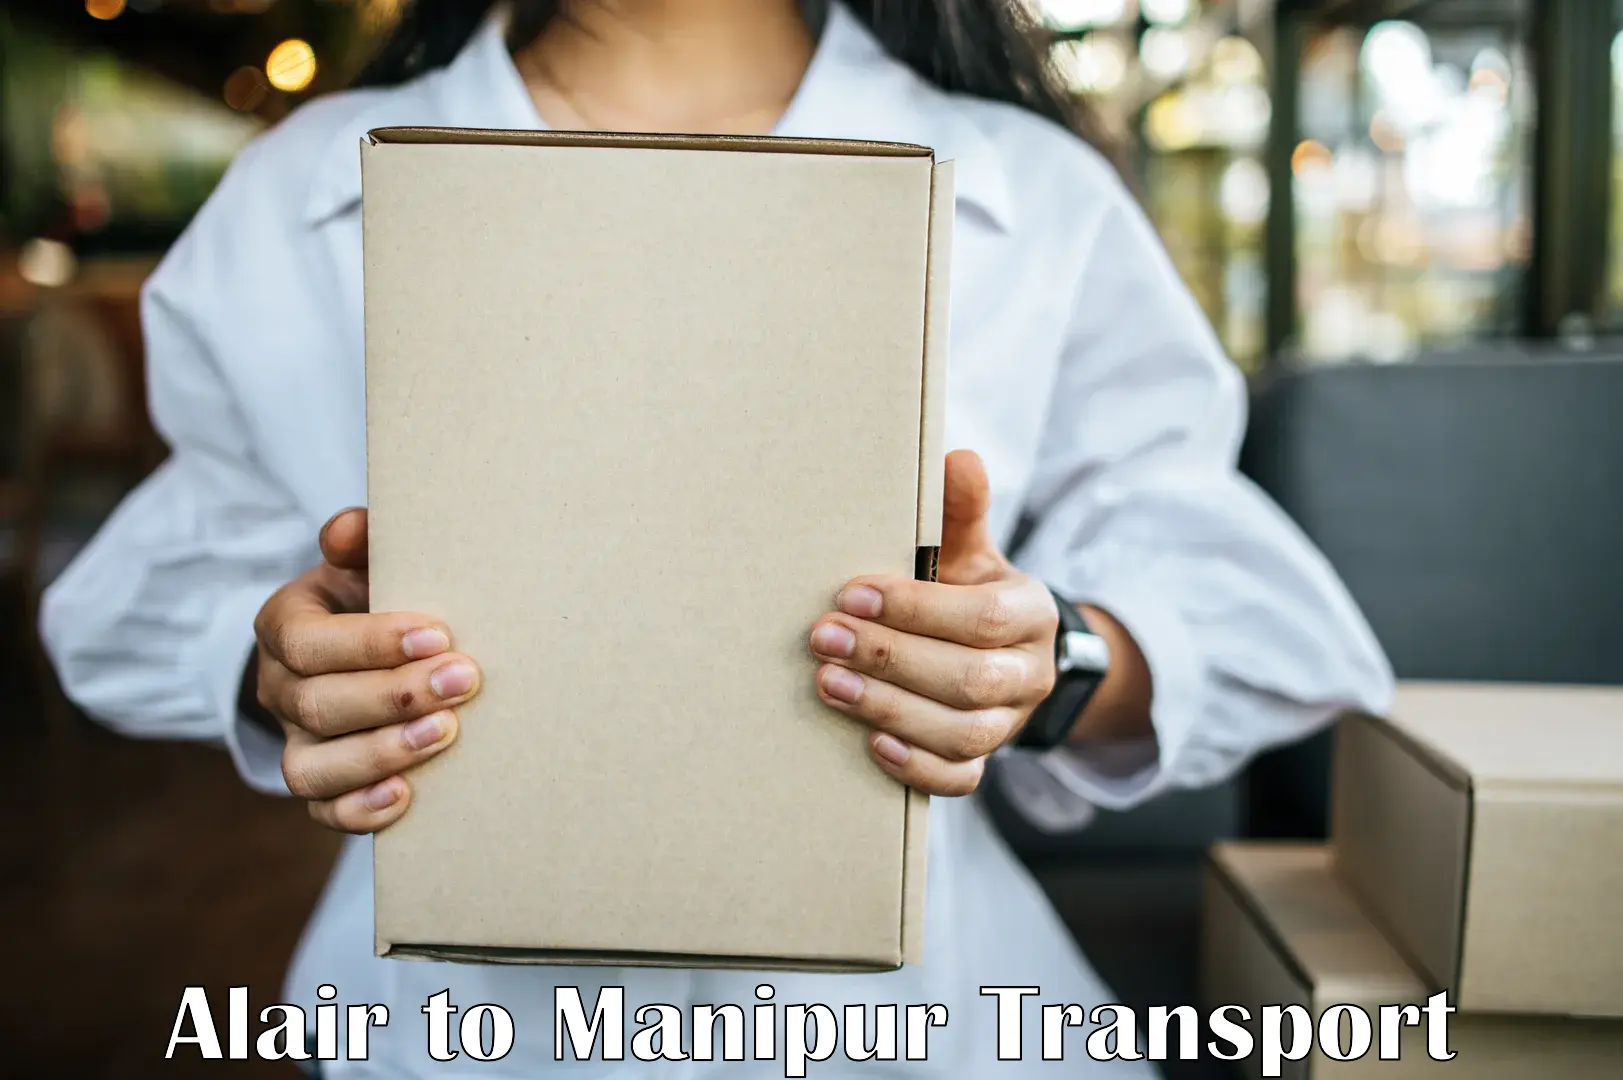 Commercial transport service Alair to Manipur